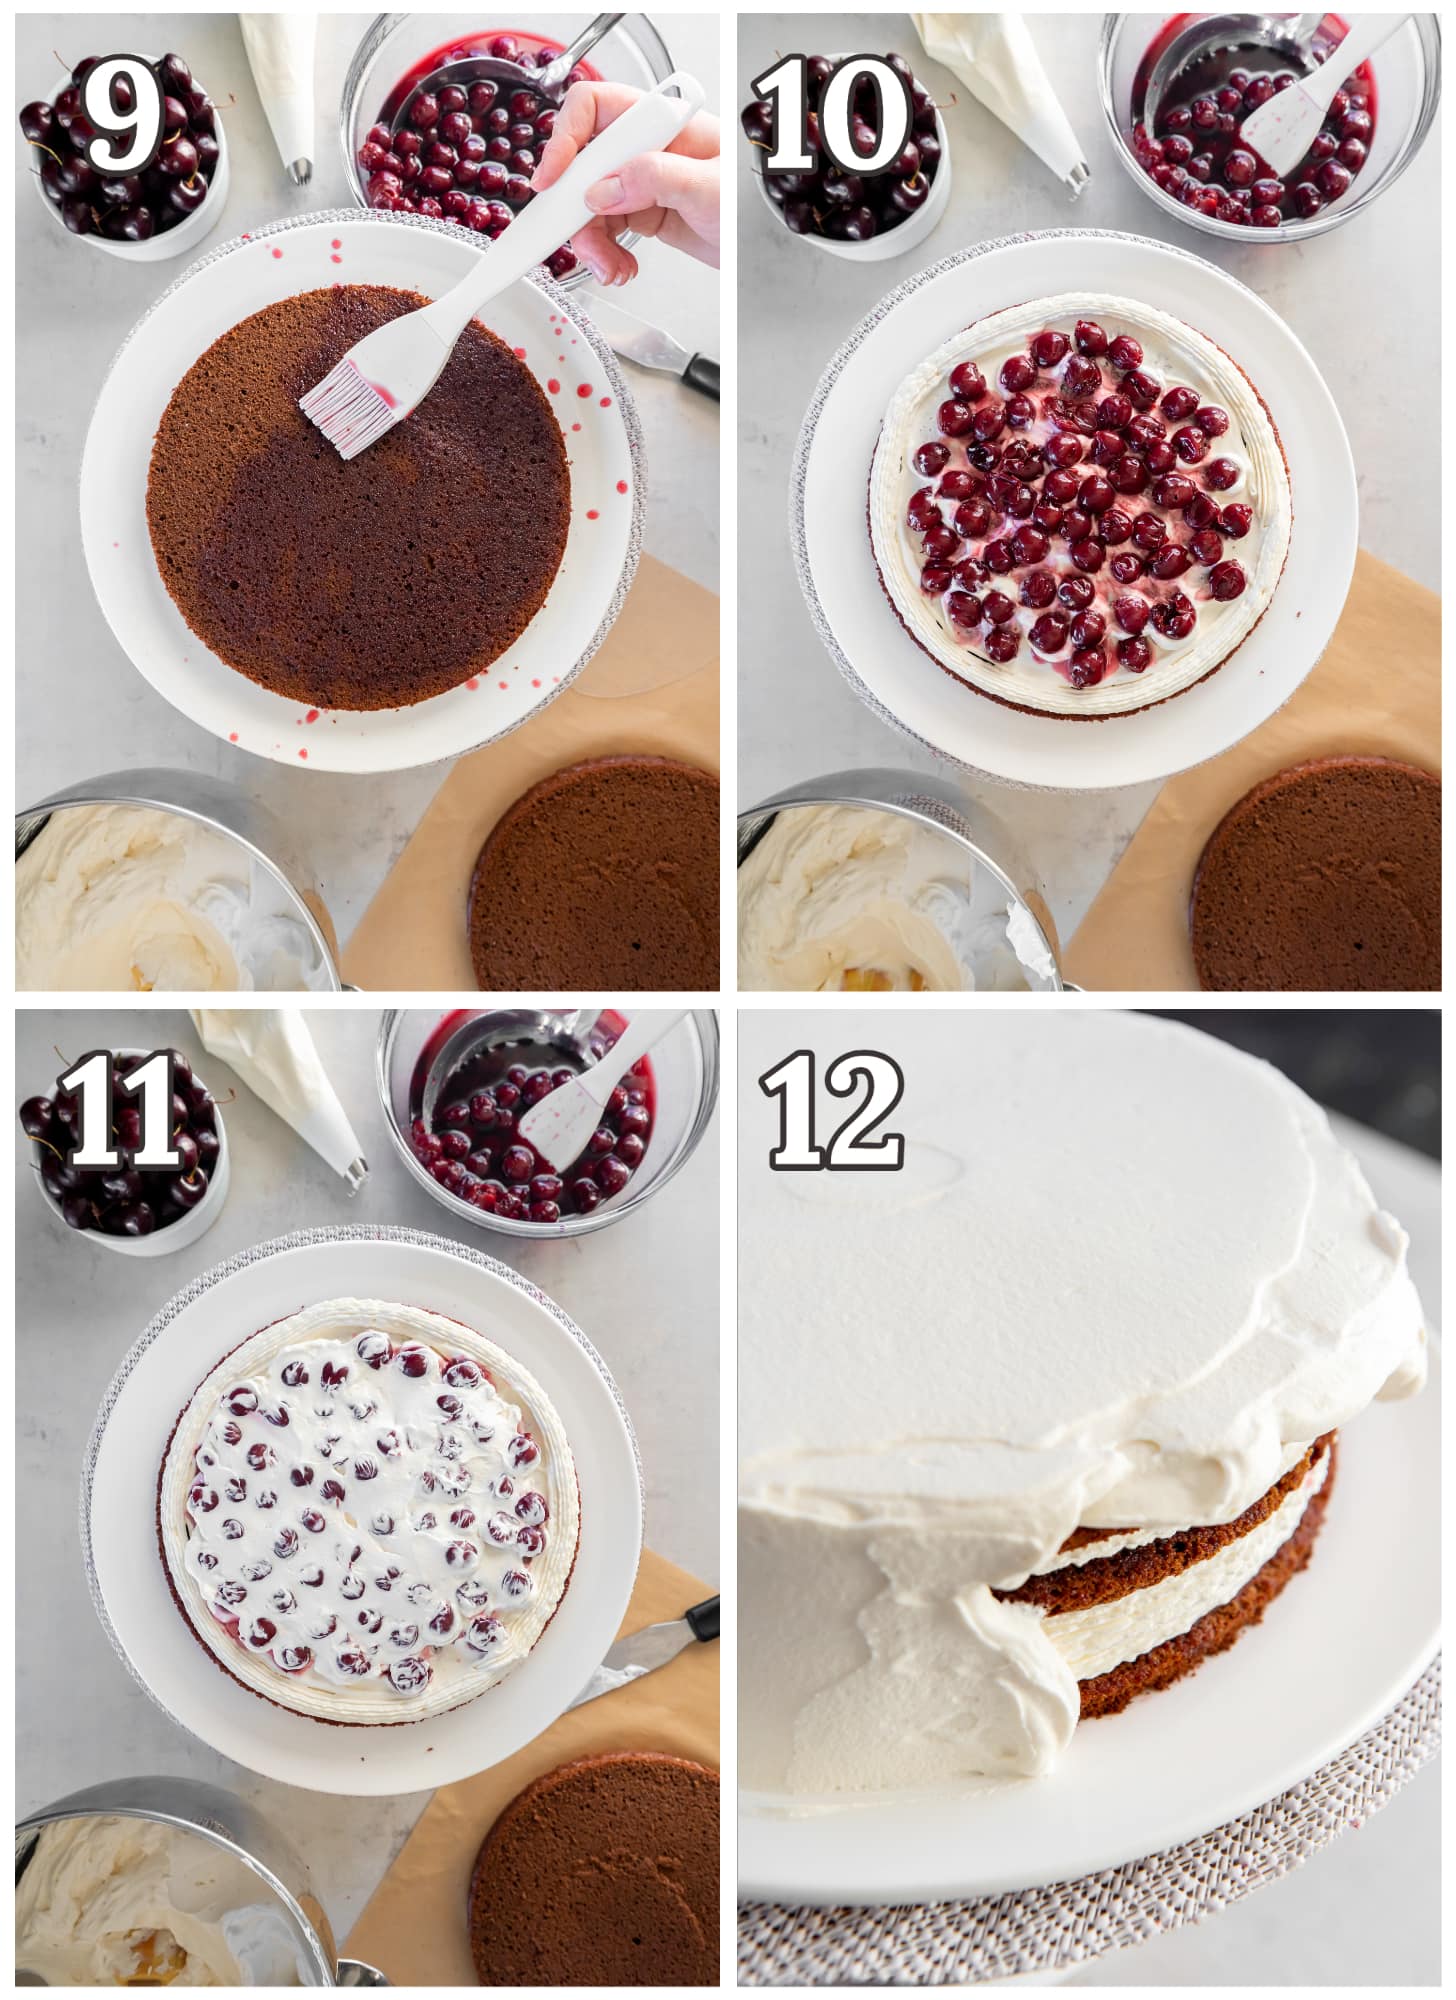 photo collage demonstrating how to assemble and layer black forest cake with kirsch cherry filling and whipped cream.